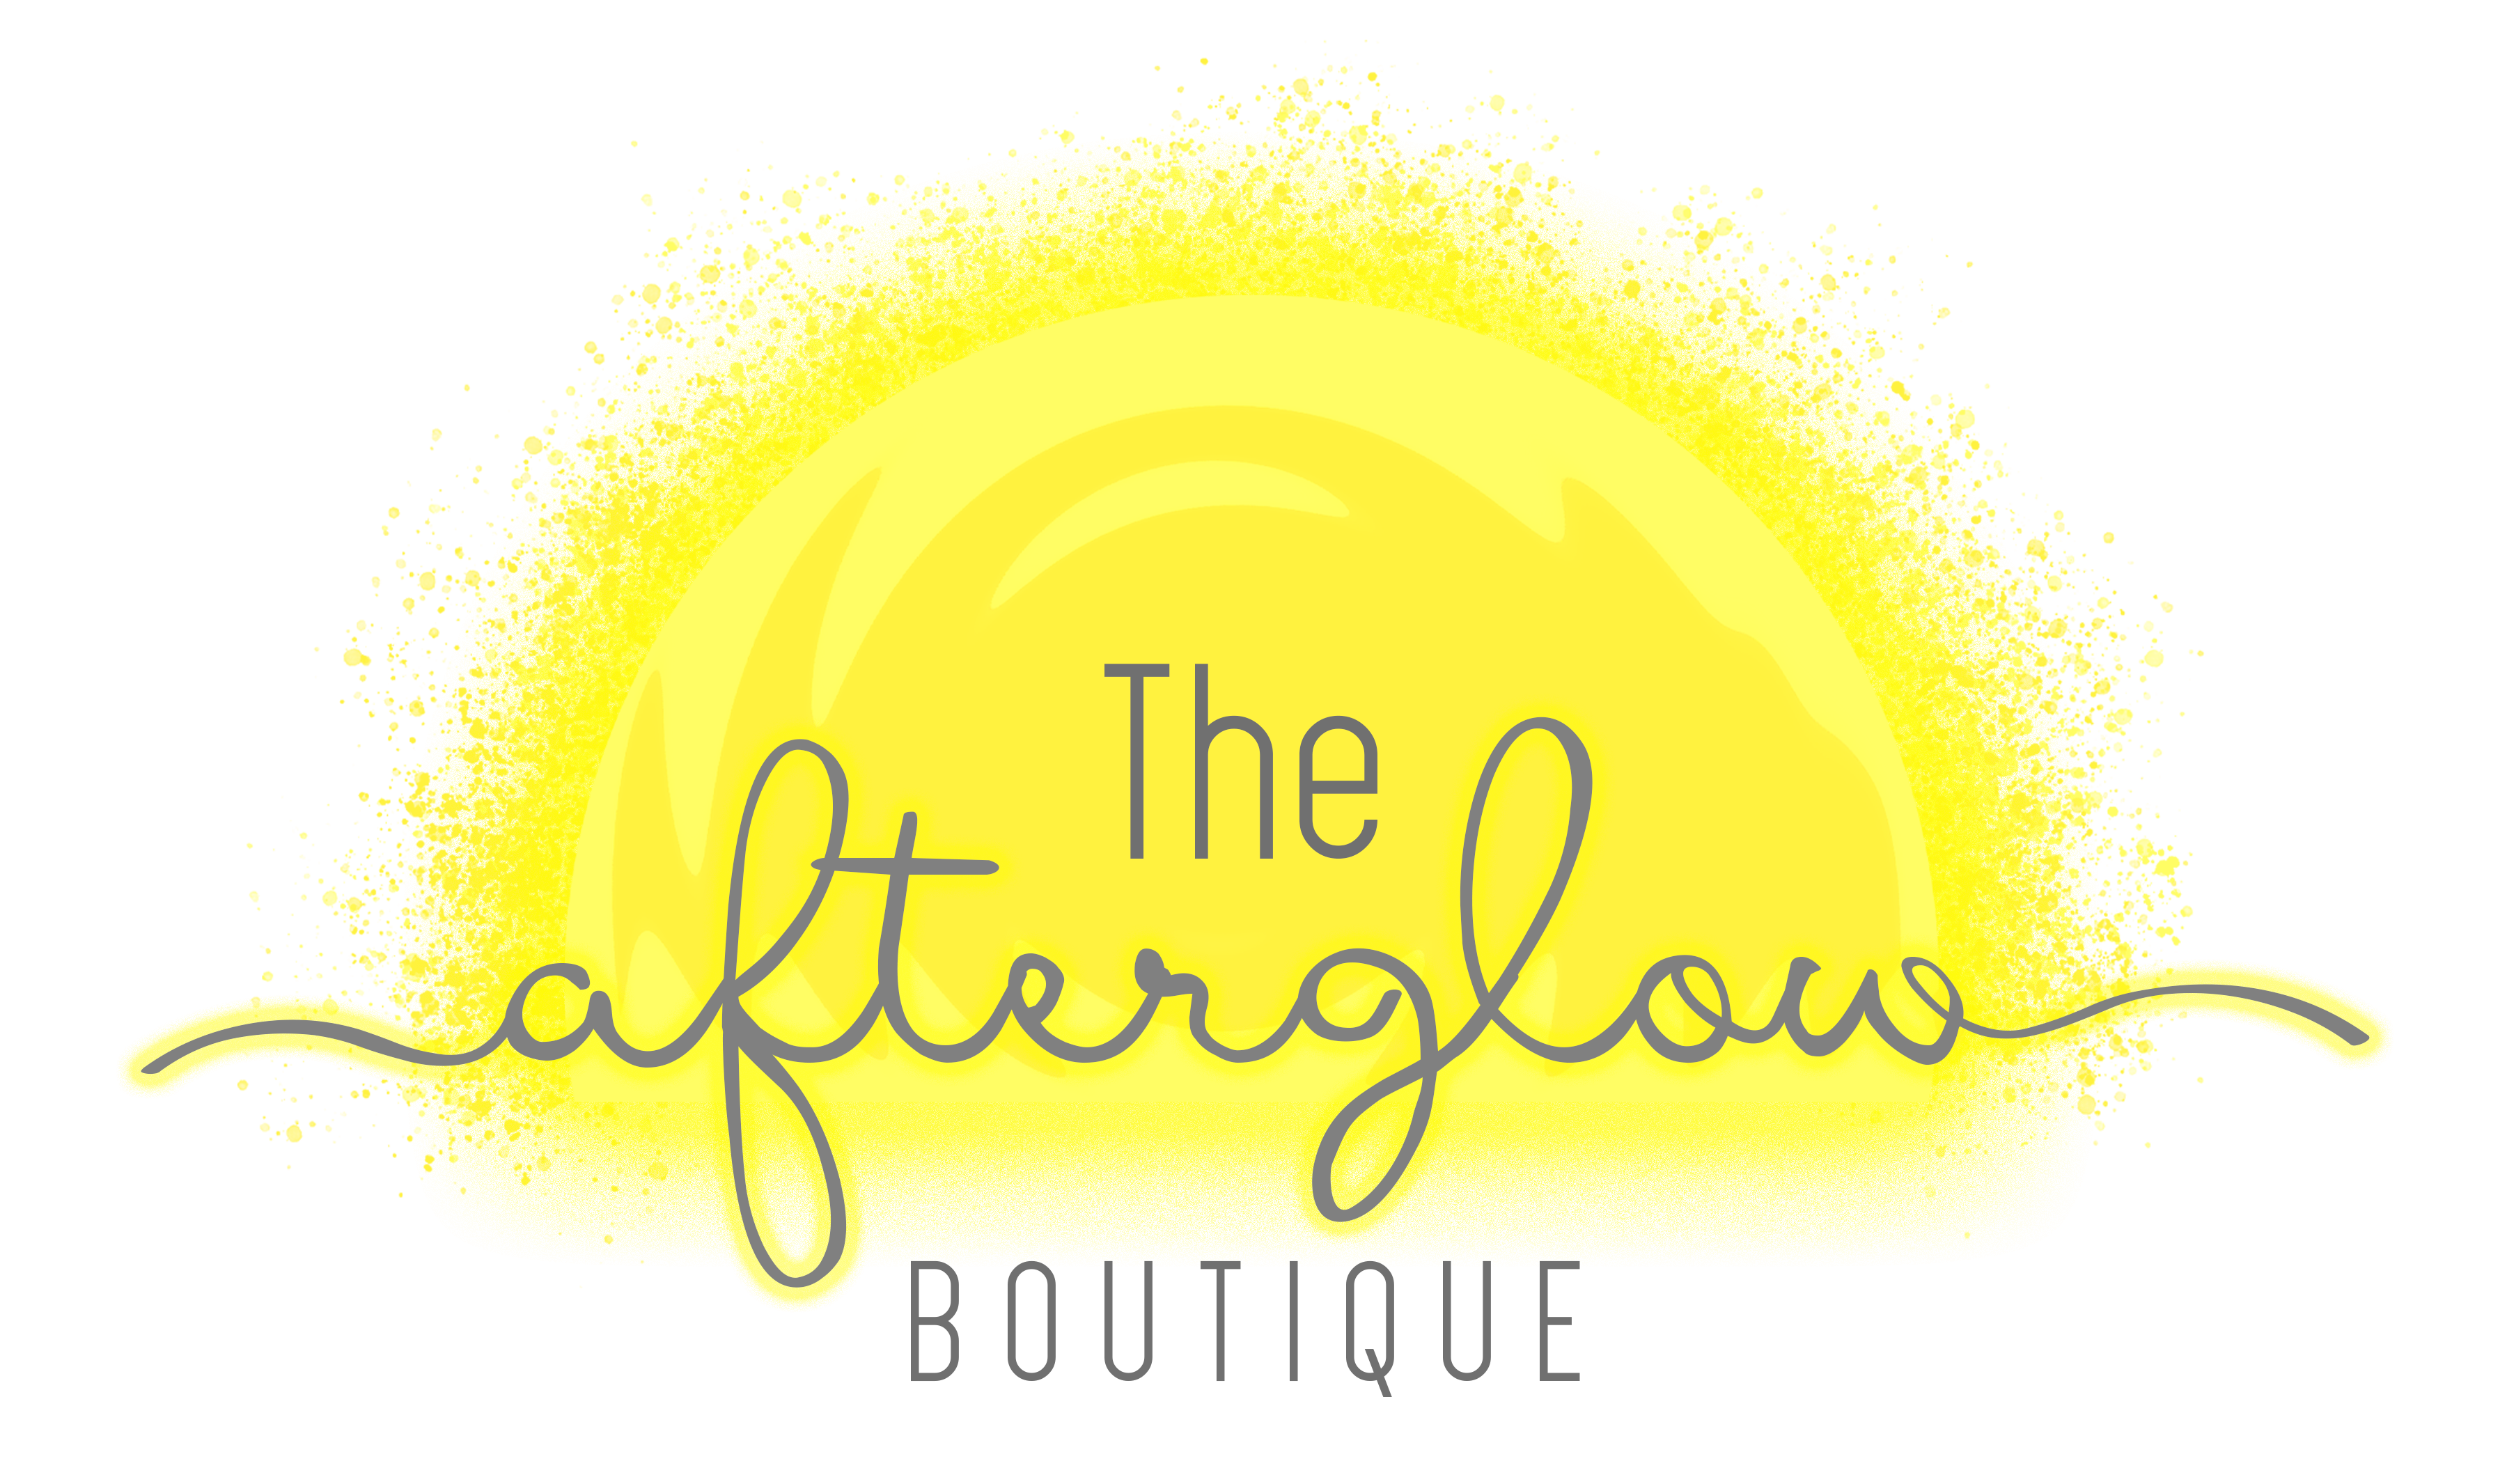 Upcycled LV – The Afterglow Boutique